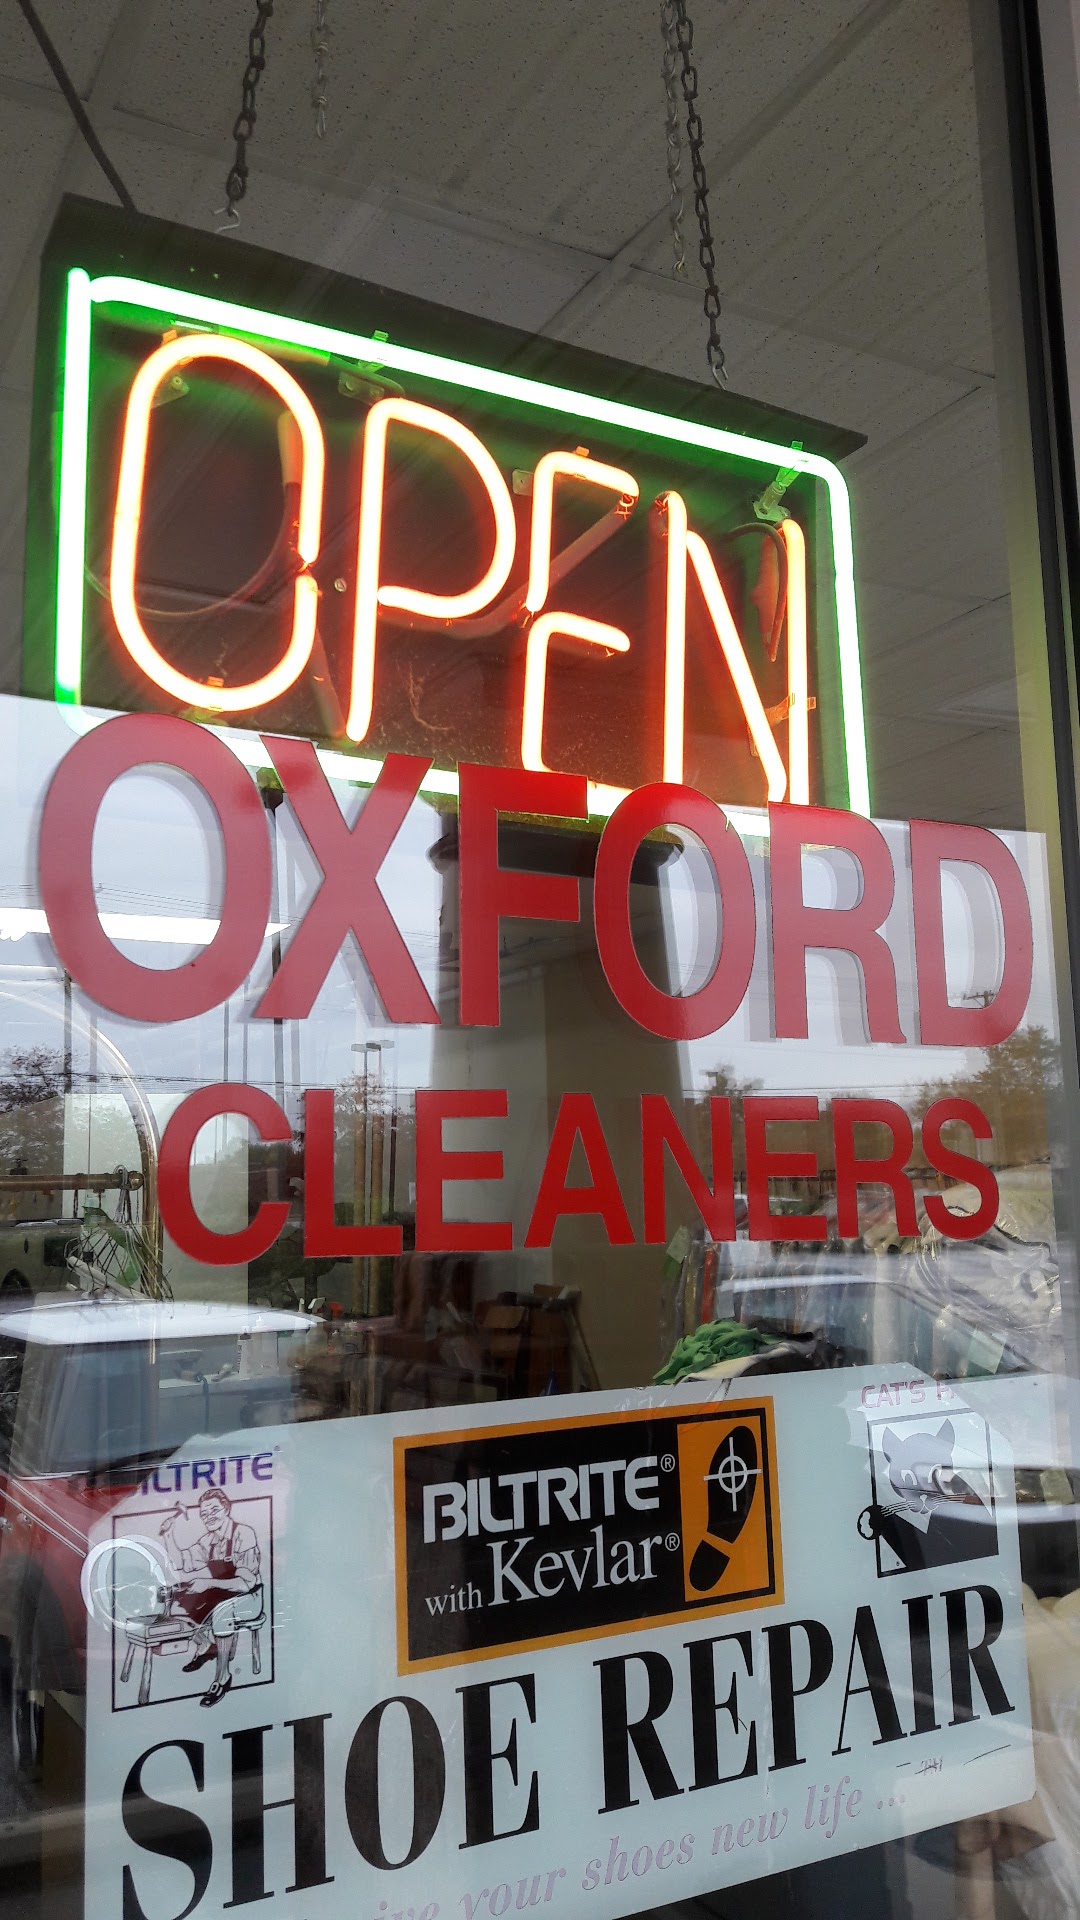 Oxford Cleaners & Laundry